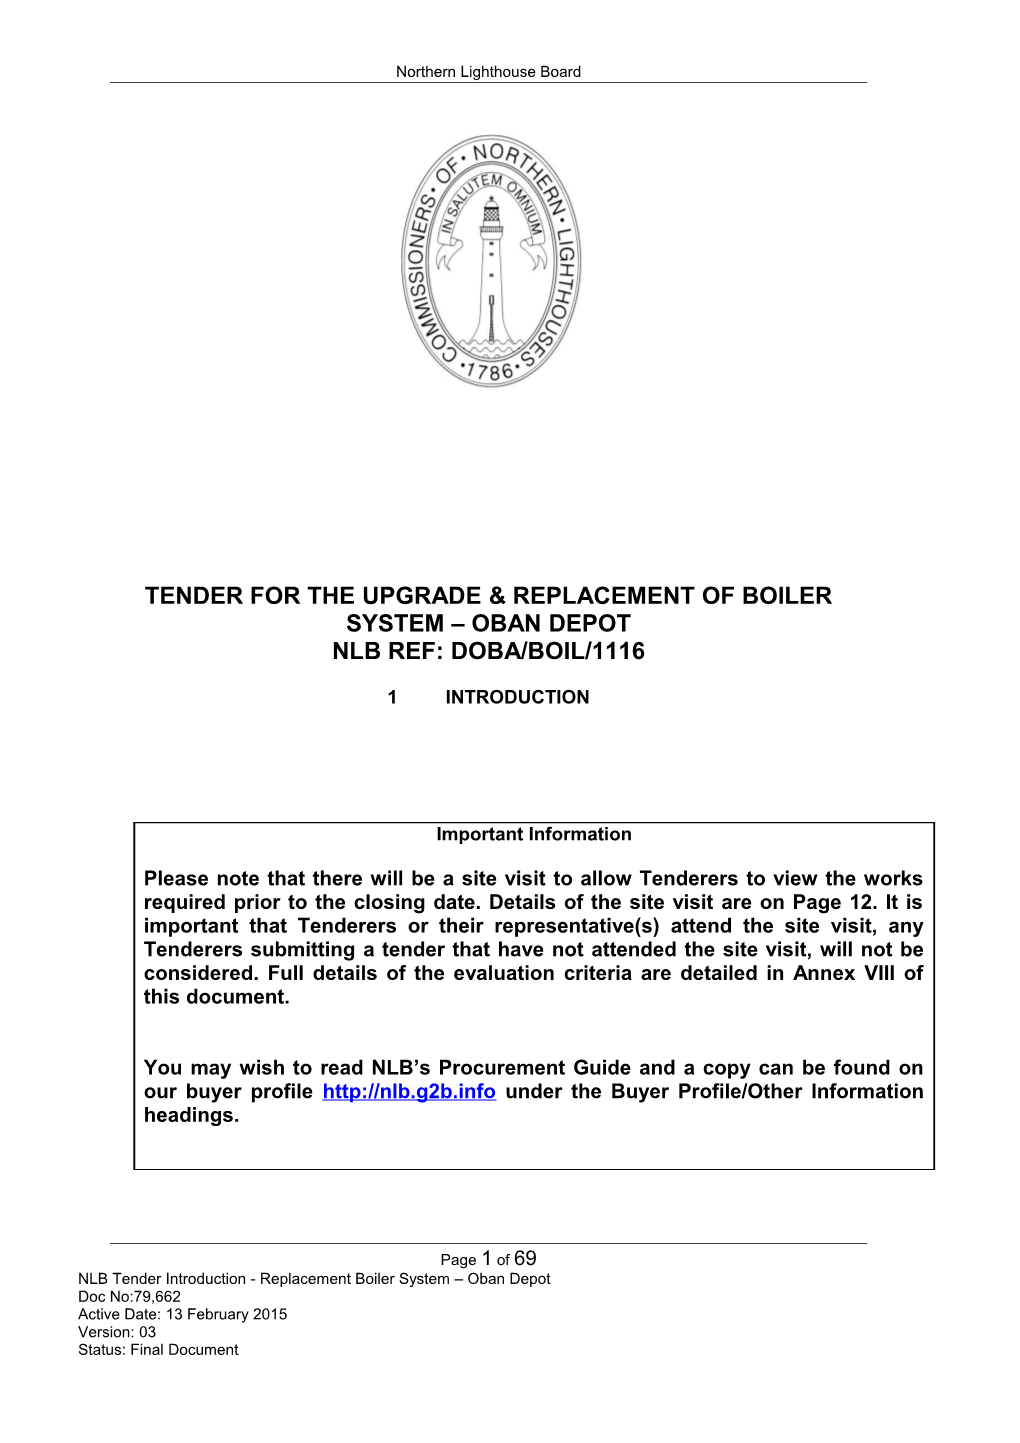 Tender for the Upgrade & Replacement of Boiler System Oban Depot